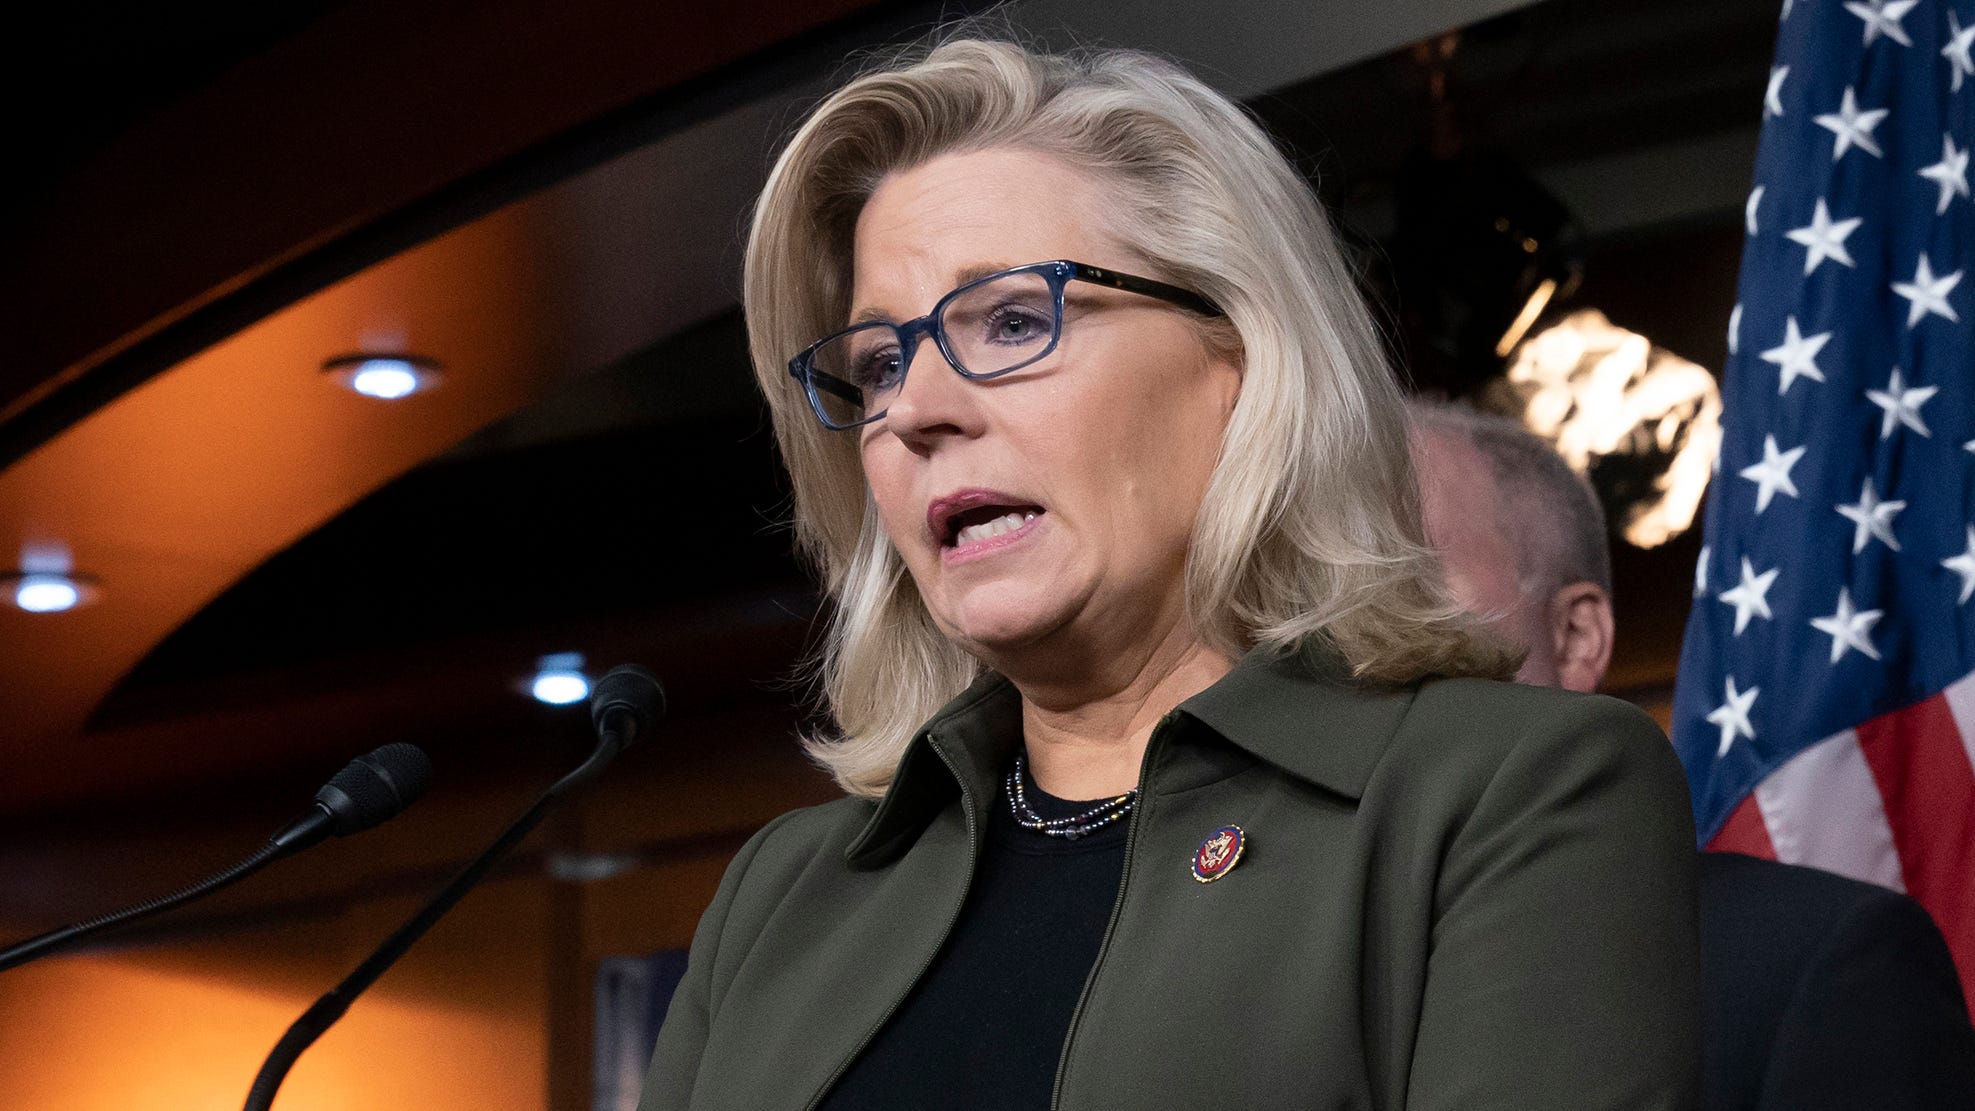 10 House Republicans Voted To Impeach Donald Trump Led By Liz Cheney